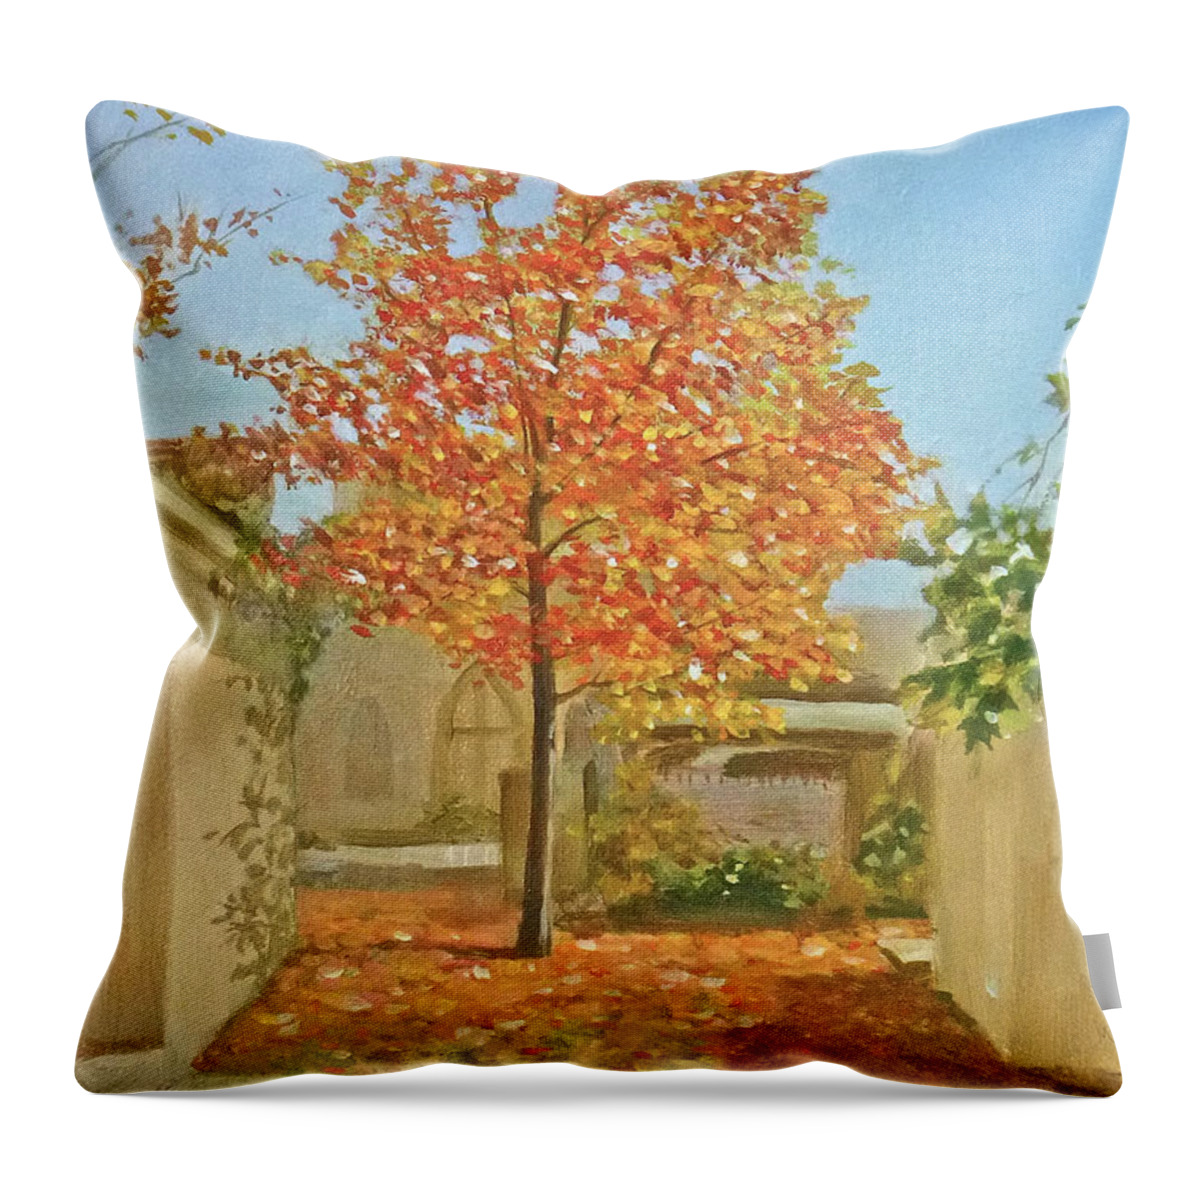 Fall Throw Pillow featuring the painting Autumn Tree by Ellen Paull